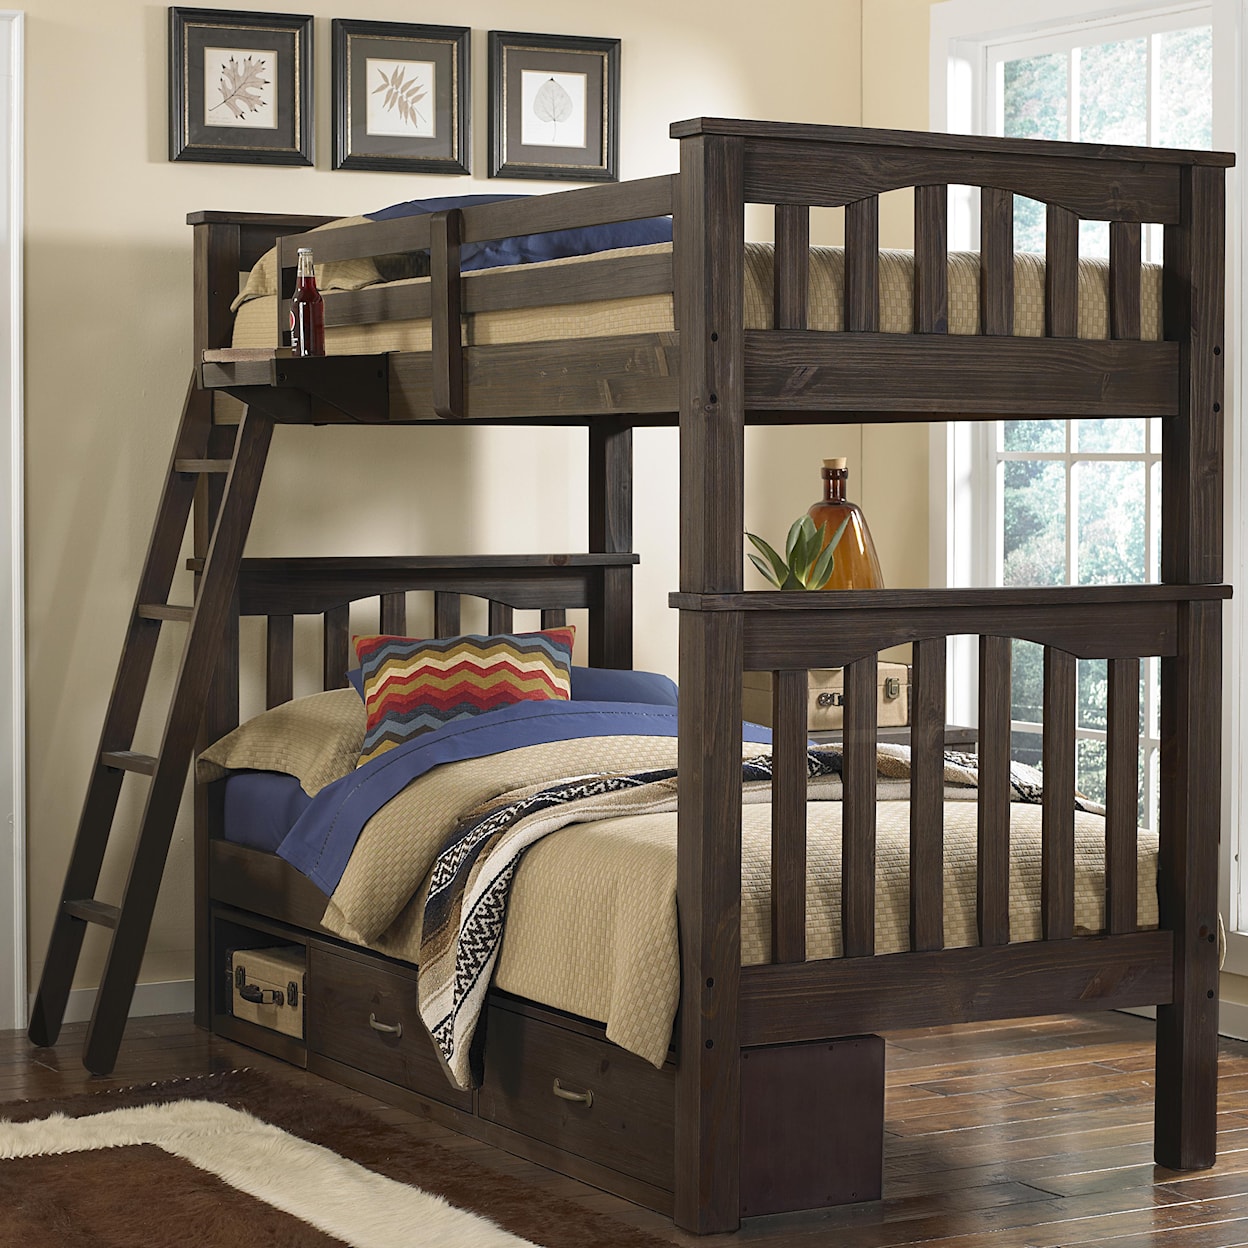 NE Kids Highlands Twin Over Twin Harper Bunk Bed With Storage